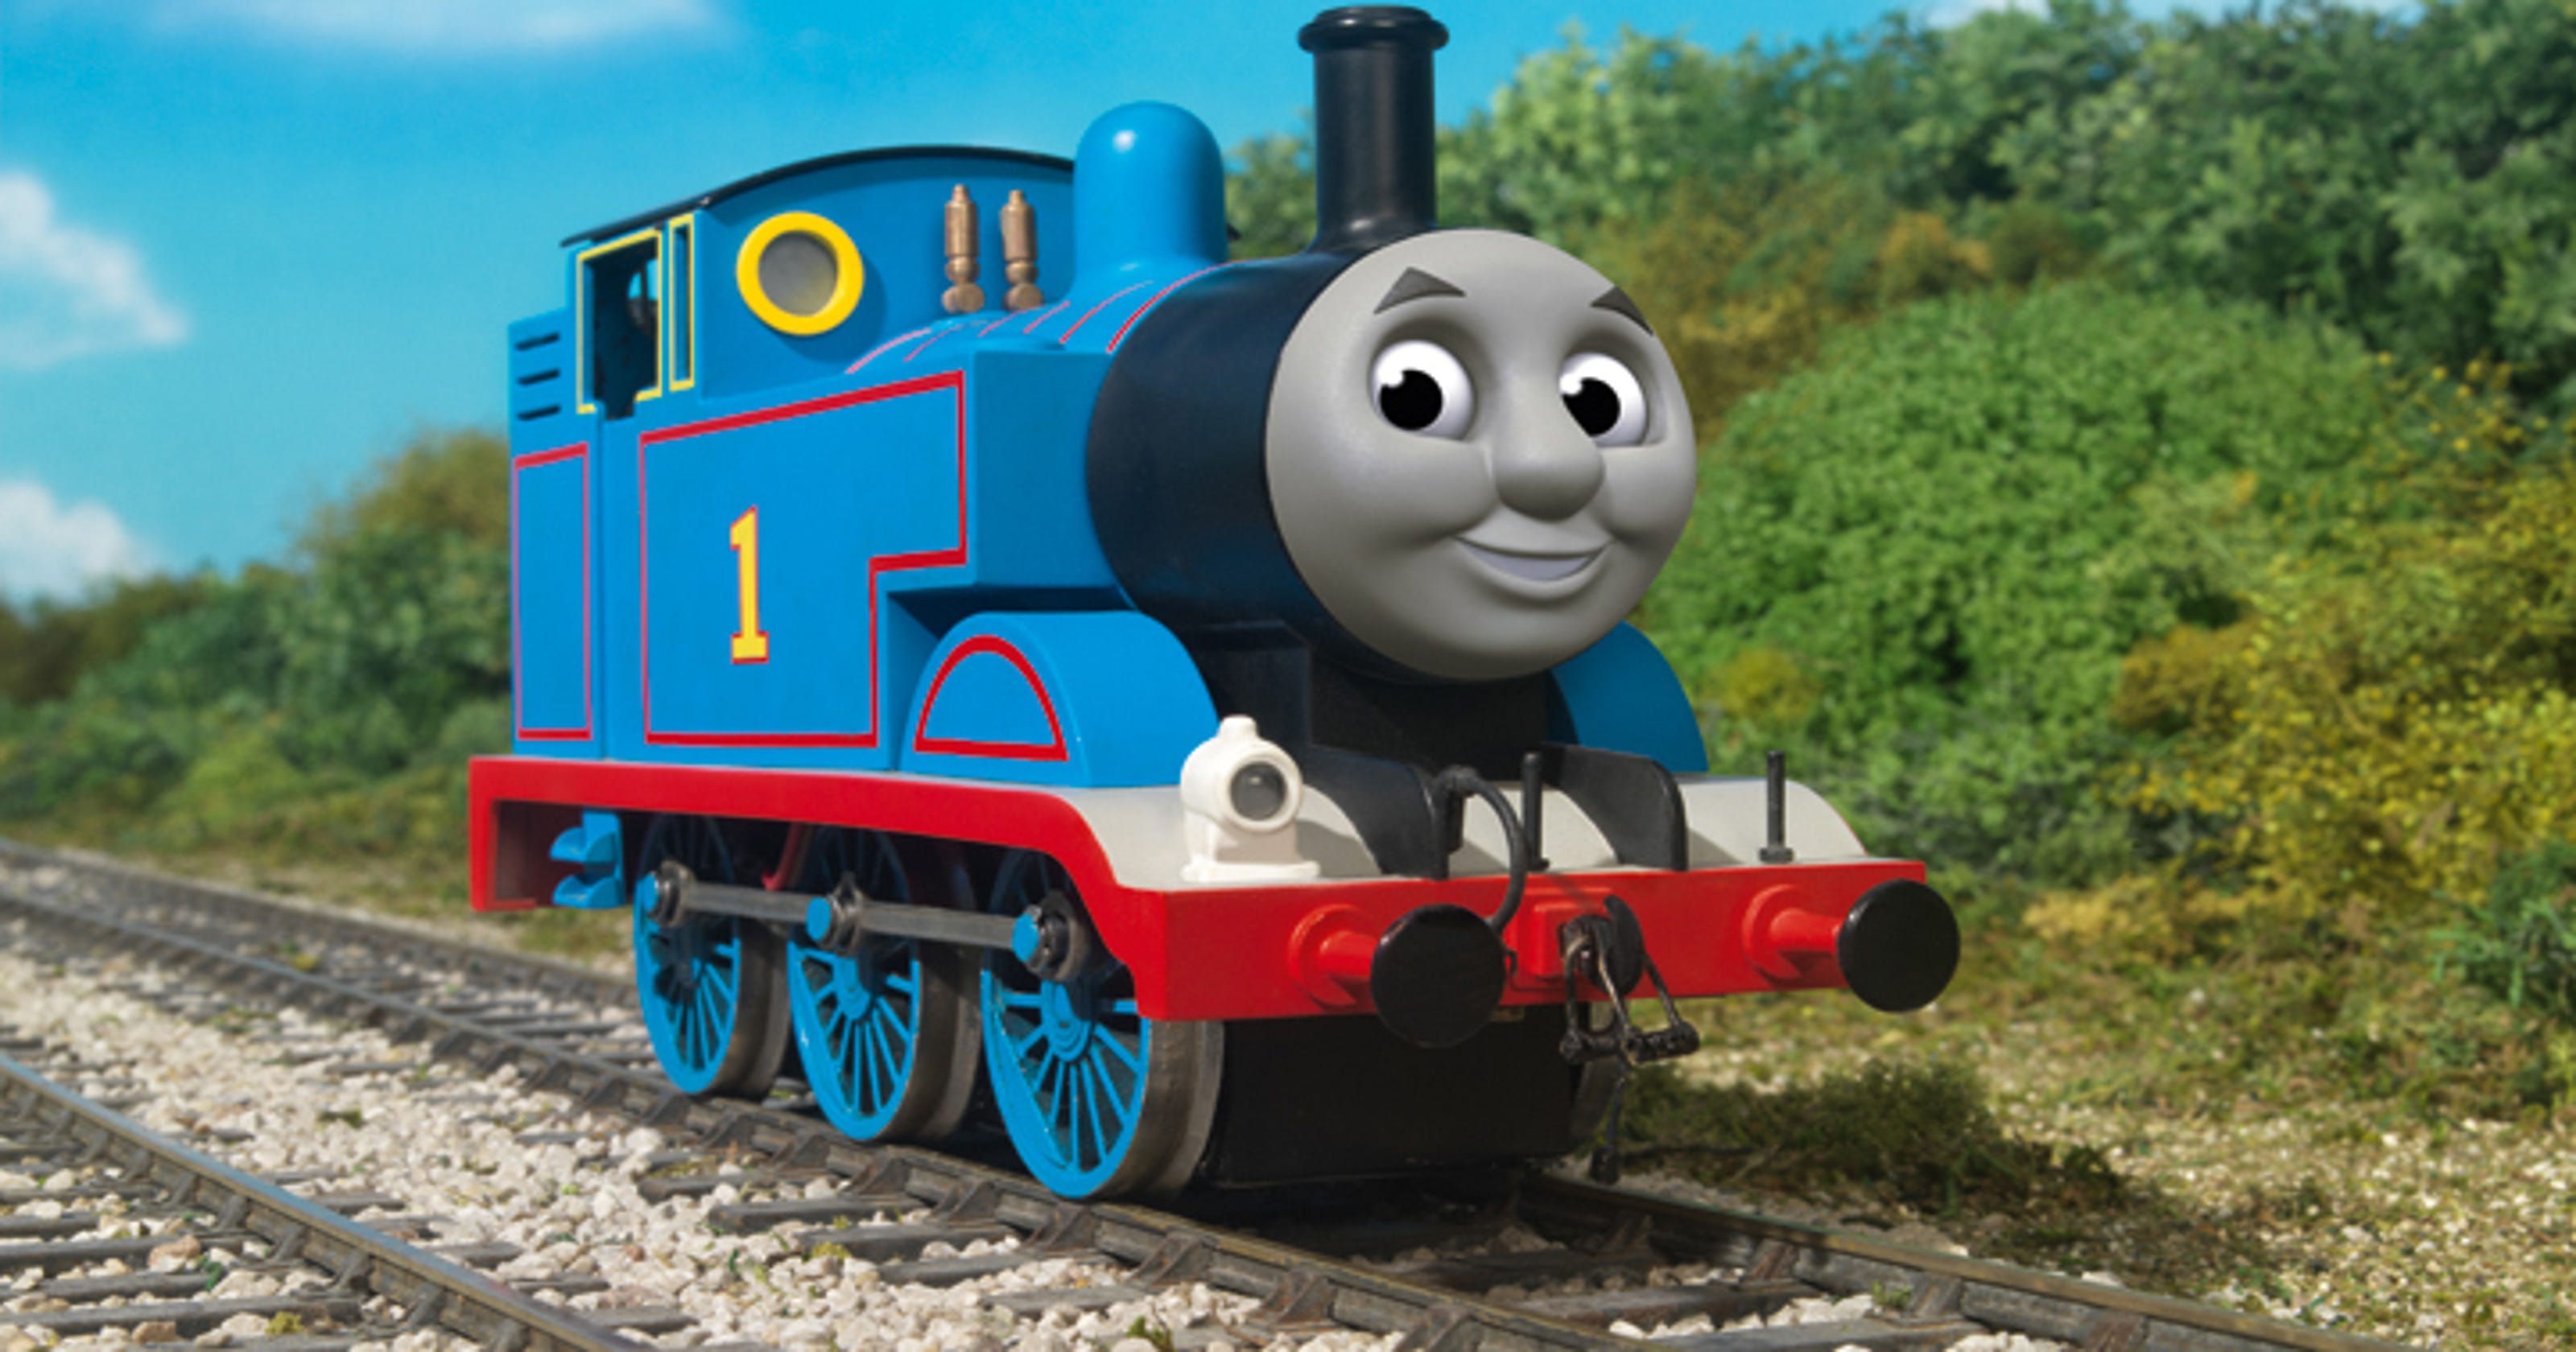 Thomas The Tank Engine Is Getting Two New Female Characters To Help - Riset